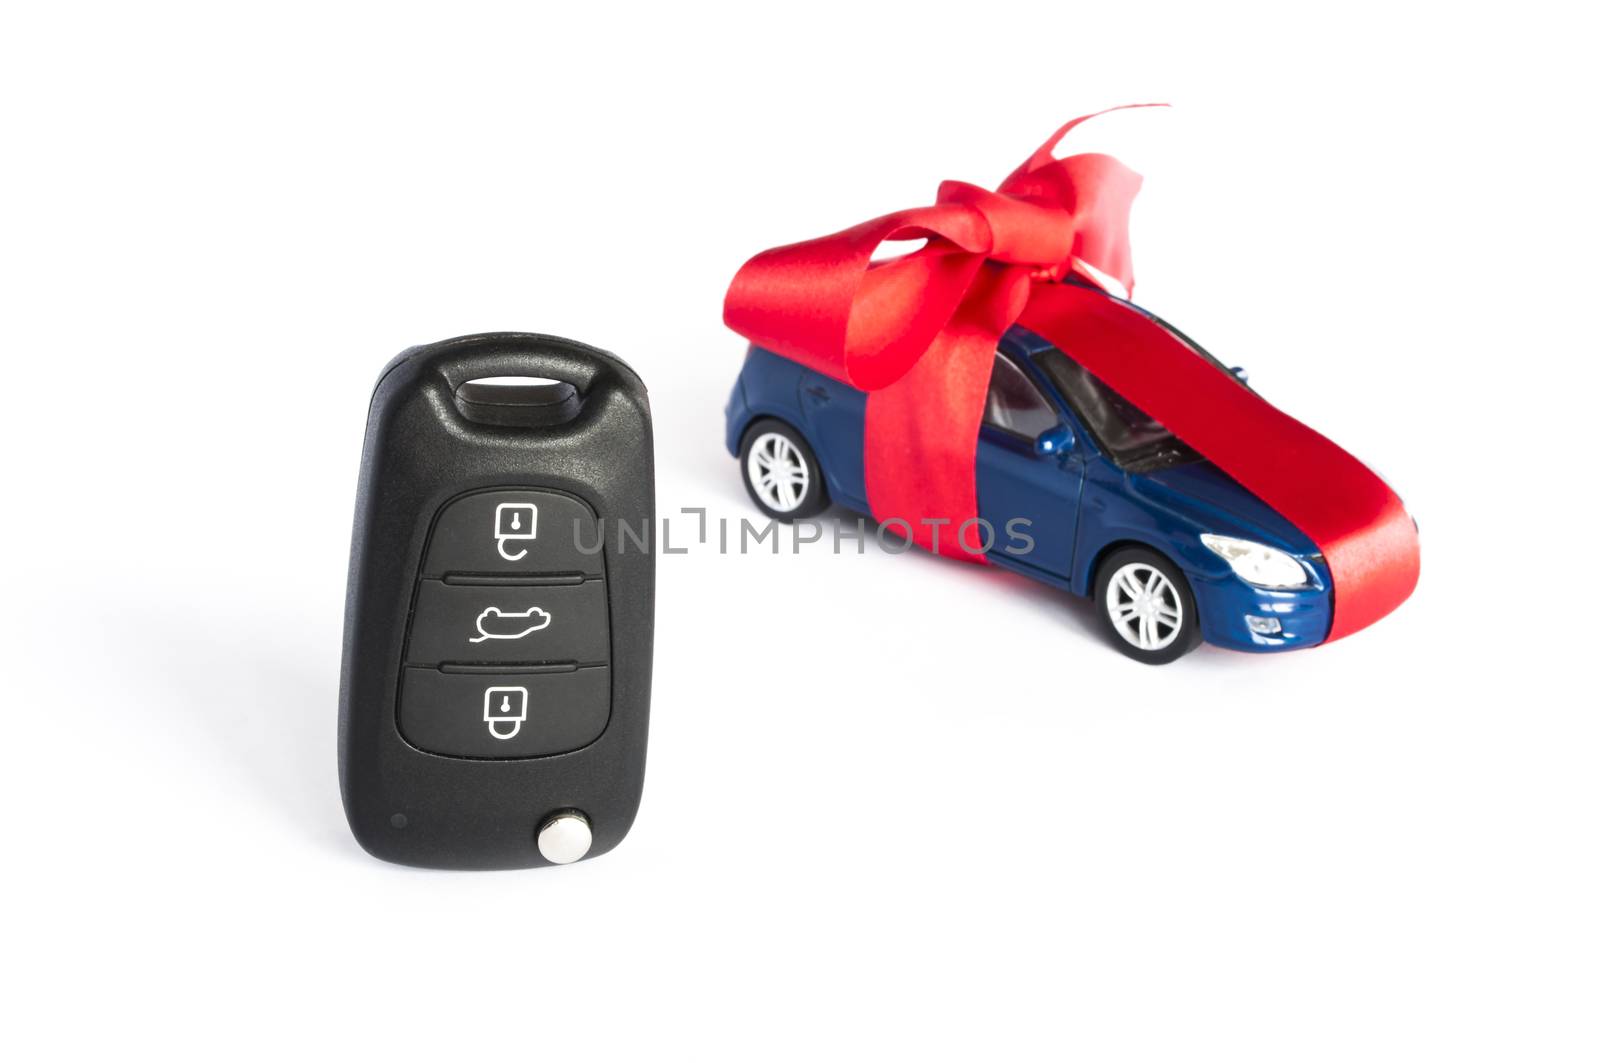 Gift car concept with red Bow and car key on focus